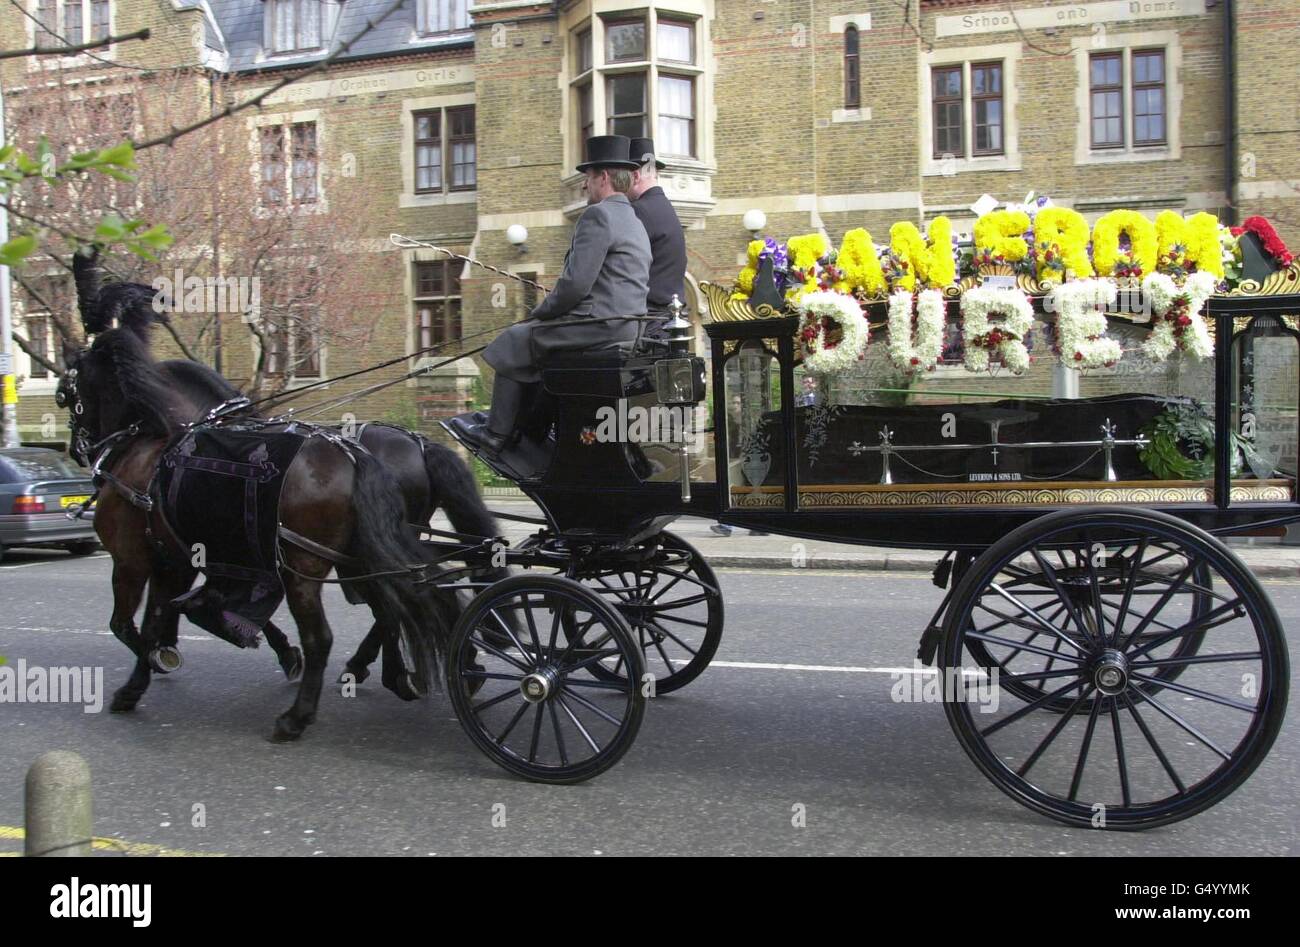 A traditional horse and carriage containing the coffin of pop star Ian Dury, led the funeral cortege. Flowers lay above the coffin bearing the words, 'Ian from Durex'. * Other flowers on the hearse were from the band Madness who sent a message saying 'Uncle Ian from Madness'. Other flowers said 'Oi Oi', 'Dad' and 'Durex', the latter a play on Ian Dury's name. The procession left from the Belsize Park area of north London, and passed within half a mile of Kilburn High Road, which gave its name to his first band. Dury died last week aged 57, after a long battle with cancer. Stock Photo